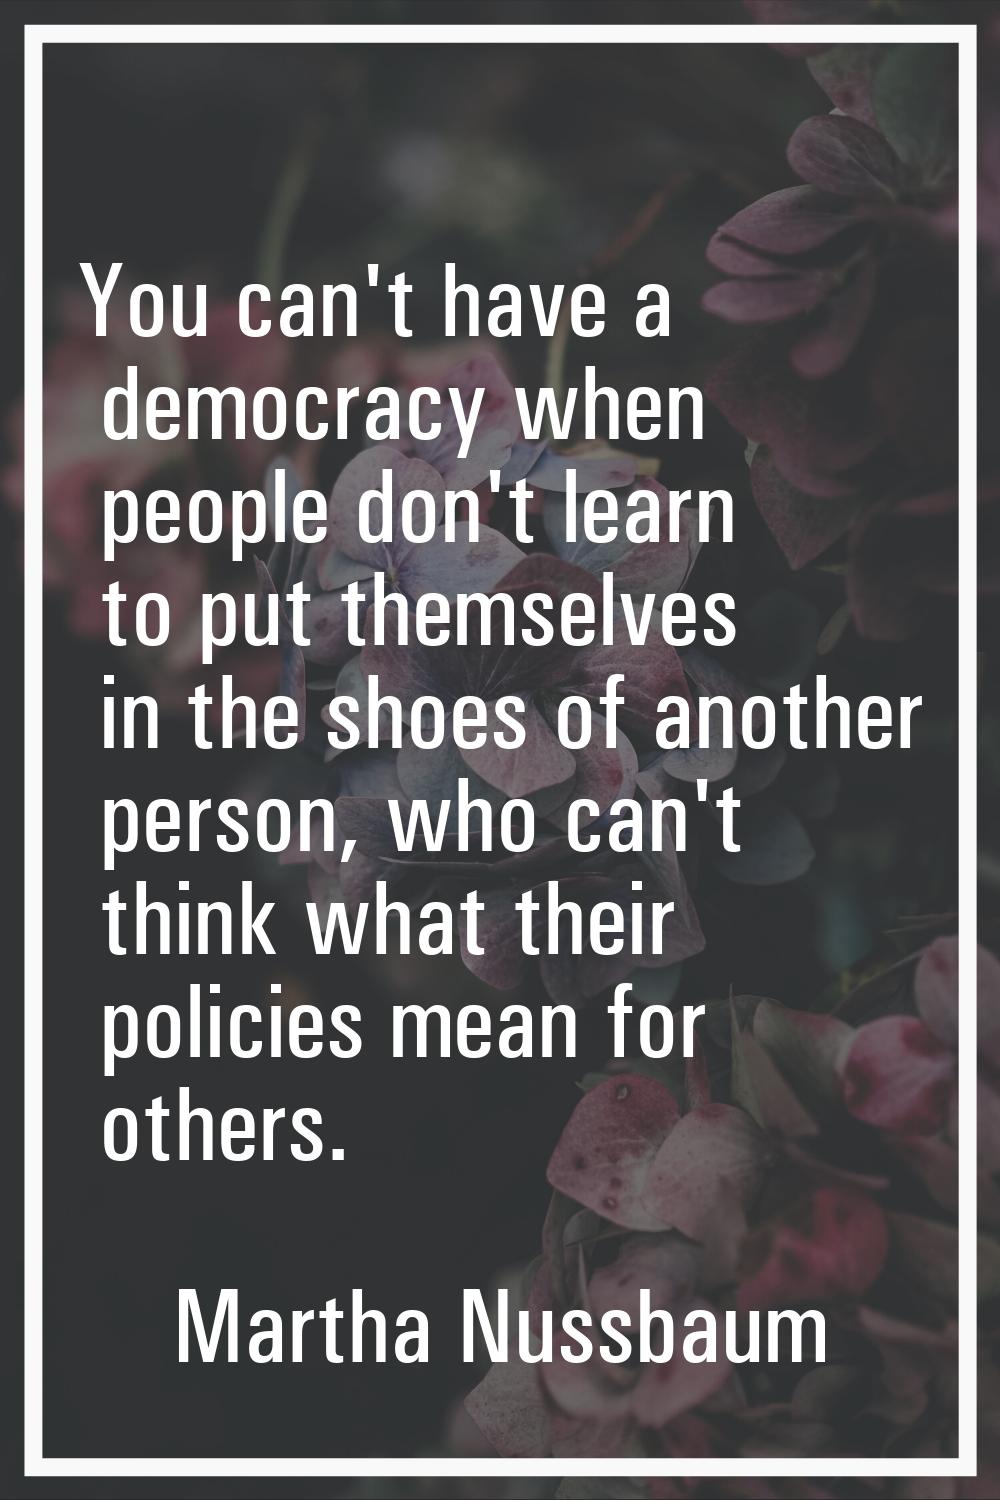 You can't have a democracy when people don't learn to put themselves in the shoes of another person